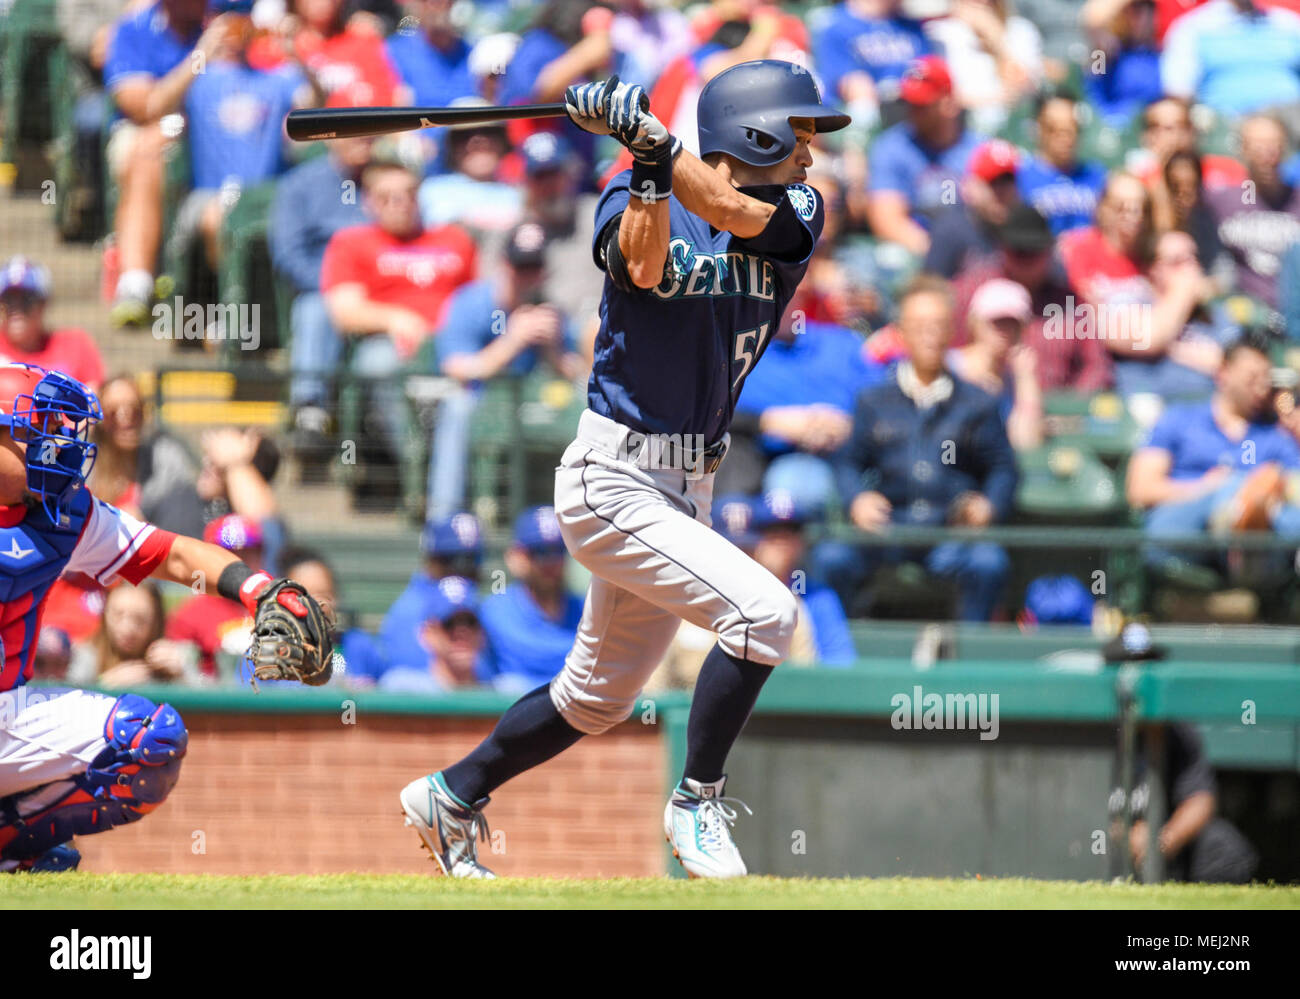 Apr 22, 2018: Seattle Mariners right fielder Ichiro Suzuki #51 at bat during an MLB game between the Seattle Mariners and the Texas Rangers at Globe Life Park in Arlington, TX Texas defeated Seattle 7-4 Albert Pena/CSM. Stock Photo